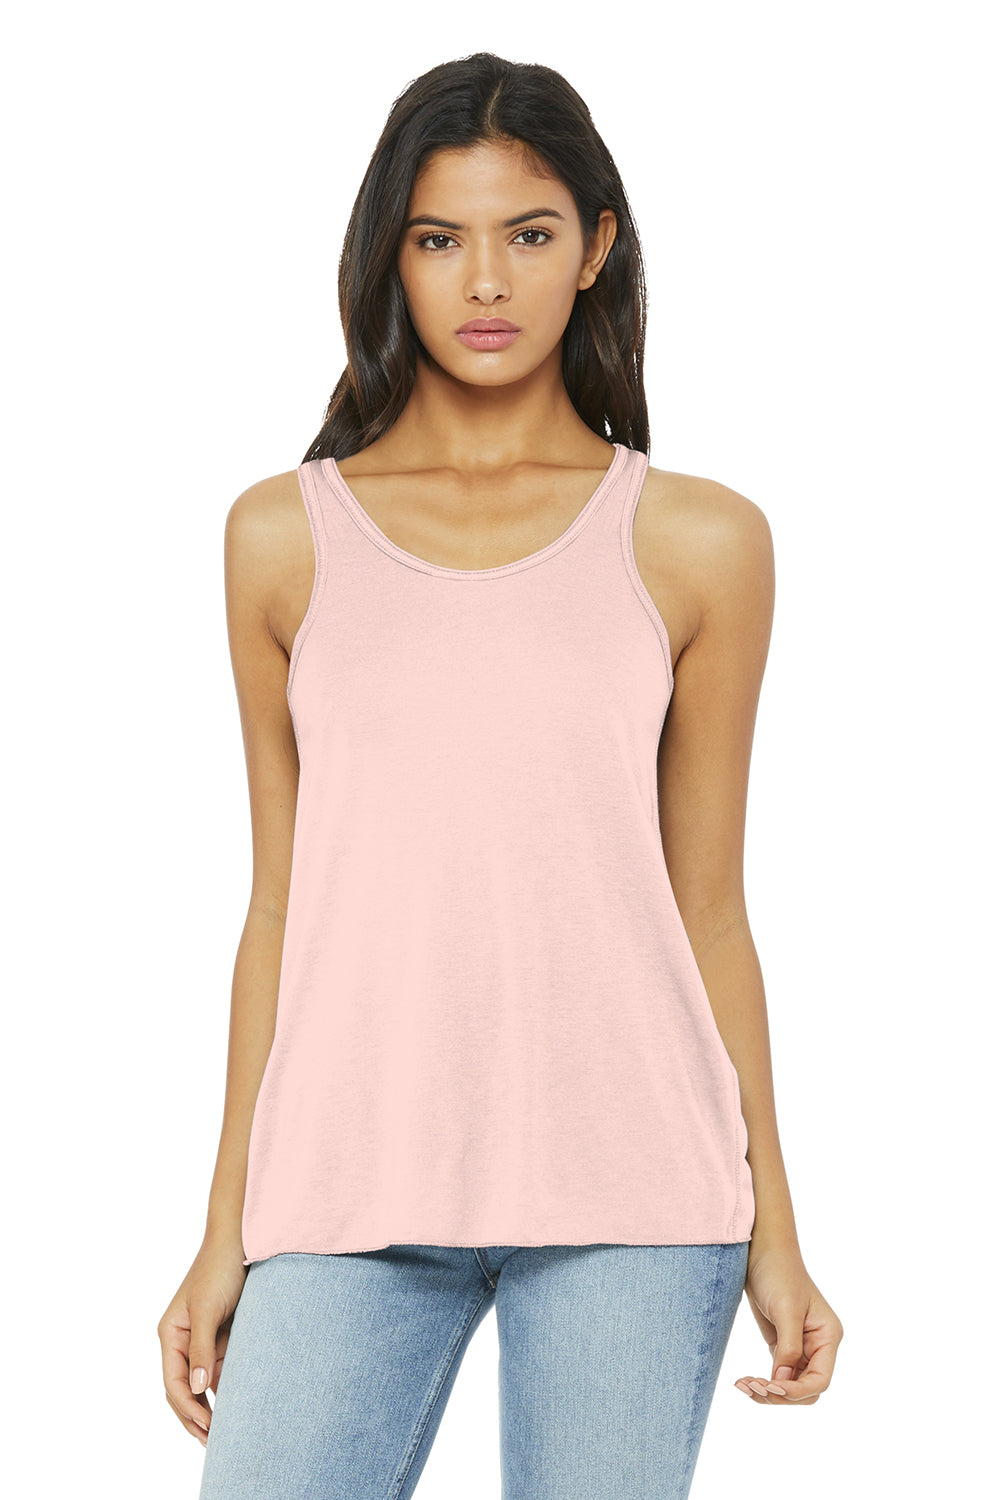 Bella + Canvas BC8800/B8800/8800 Womens Flowy Tank Top Soft Pink Model Front